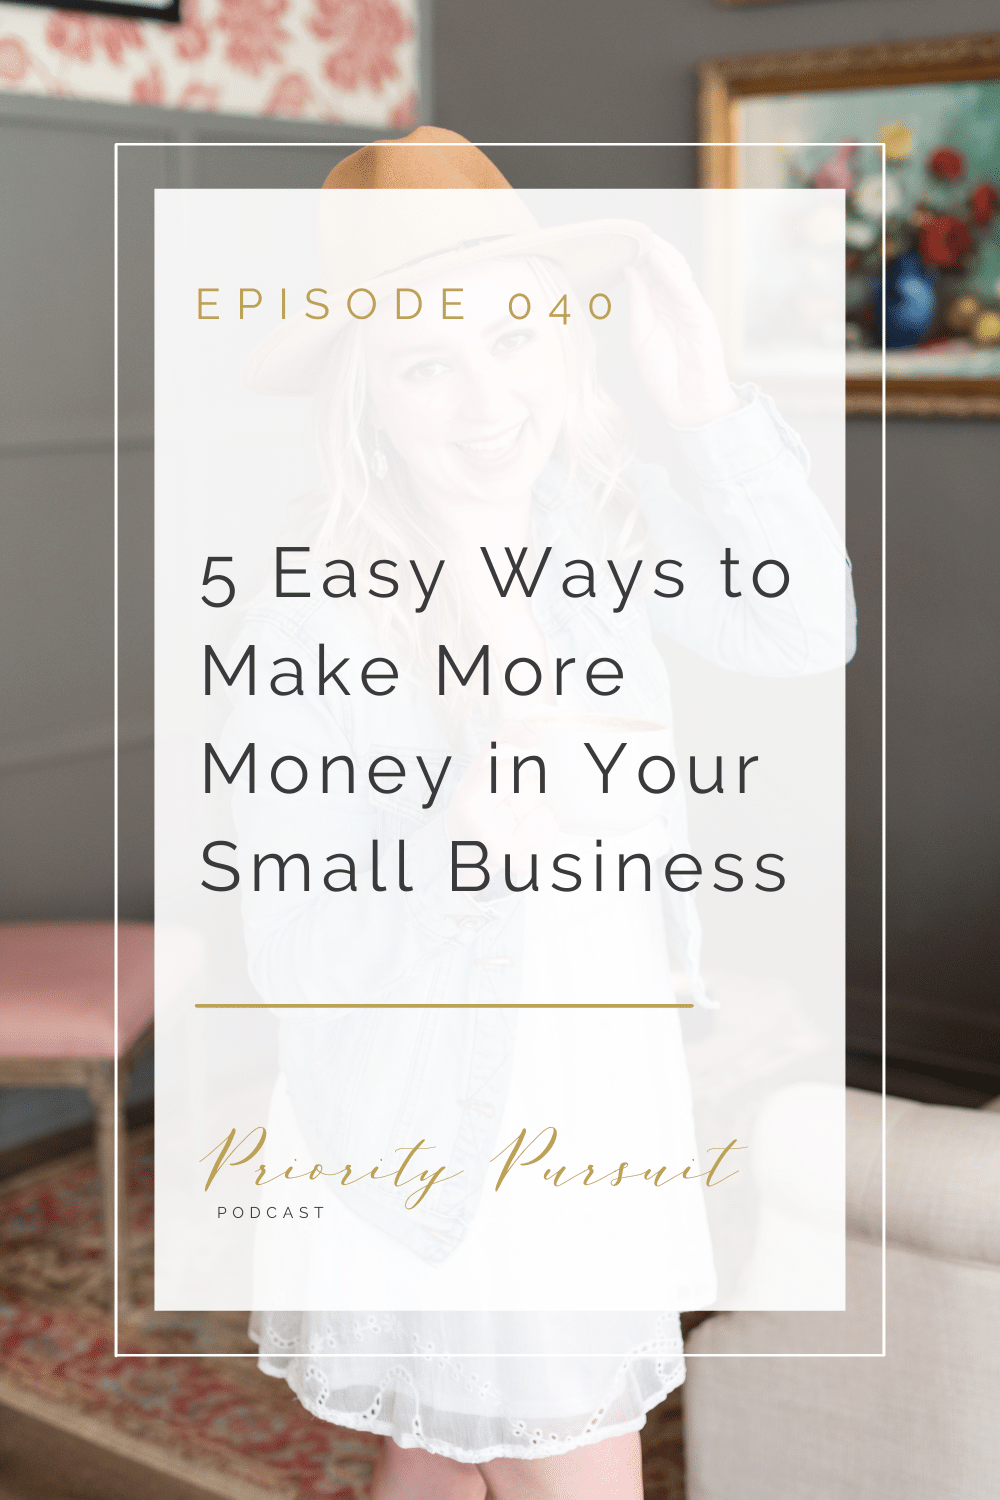 Victoria Rayburn shares five easy ways to make more money in your small business in this episode of “Priority Pursuit.” 